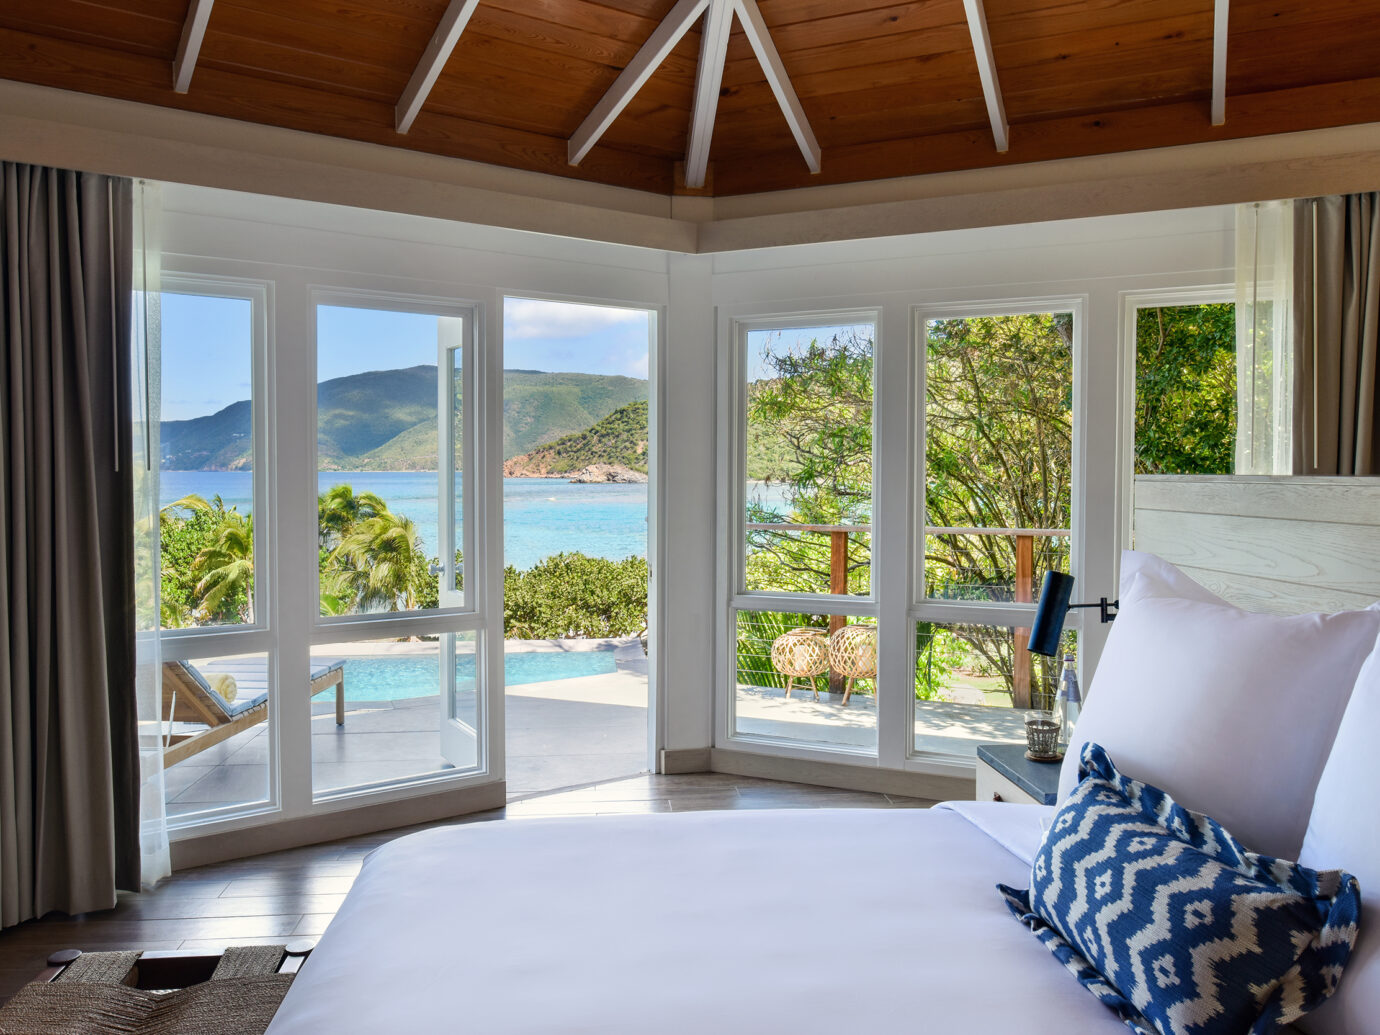 Bedroom at Rosewood Little Dix Bay